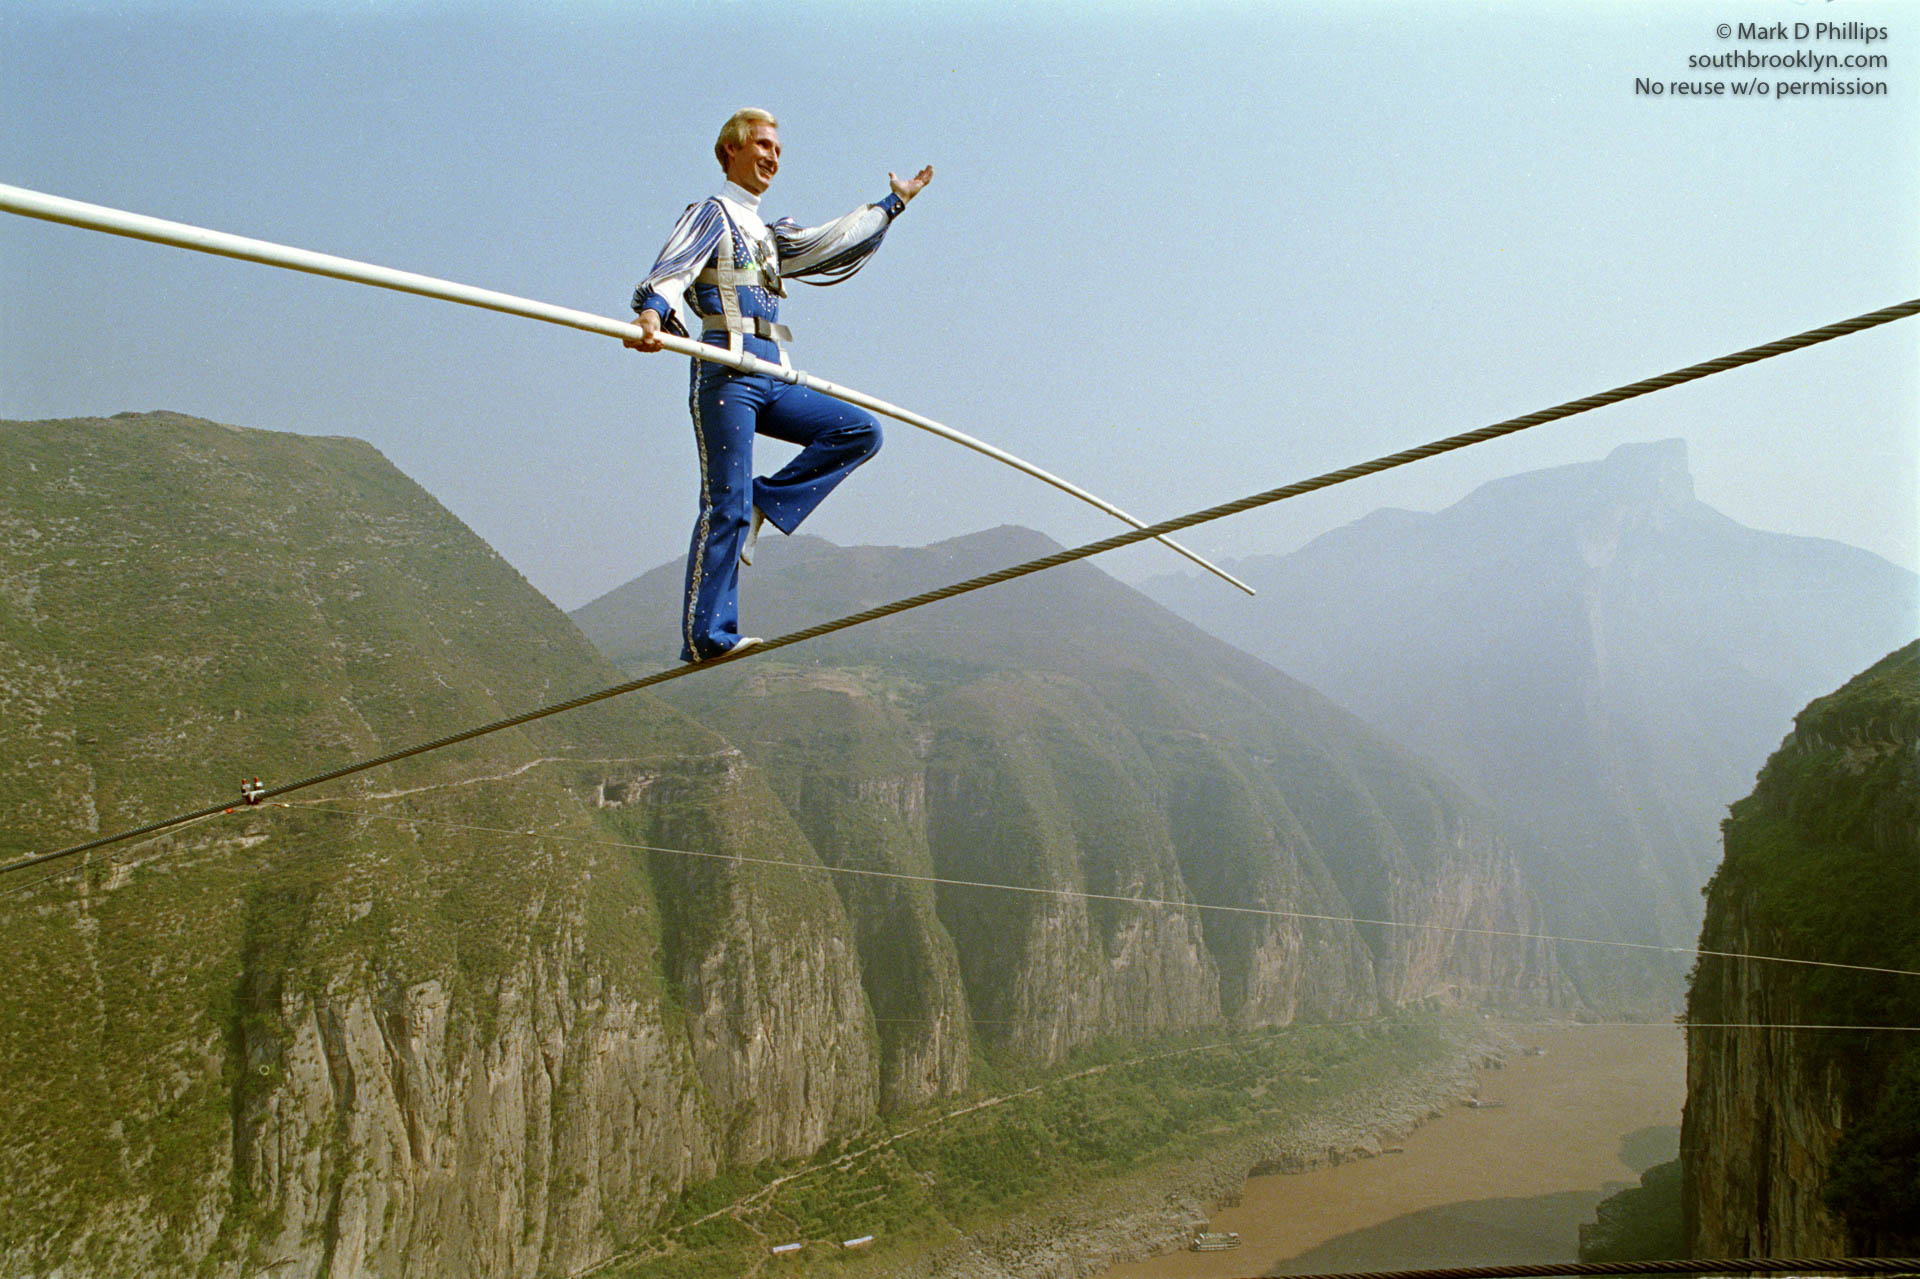 Jay Cochrane, "The Prince of the Air", completes The Great China Skywalk over the Yangtze River in Qutang Gorge, China, on October 28, 1995. The skywalk was and is the greatest ever made spanning half a mile between the canyon walls and 1,350 feet above the river. ©Mark D Phillips